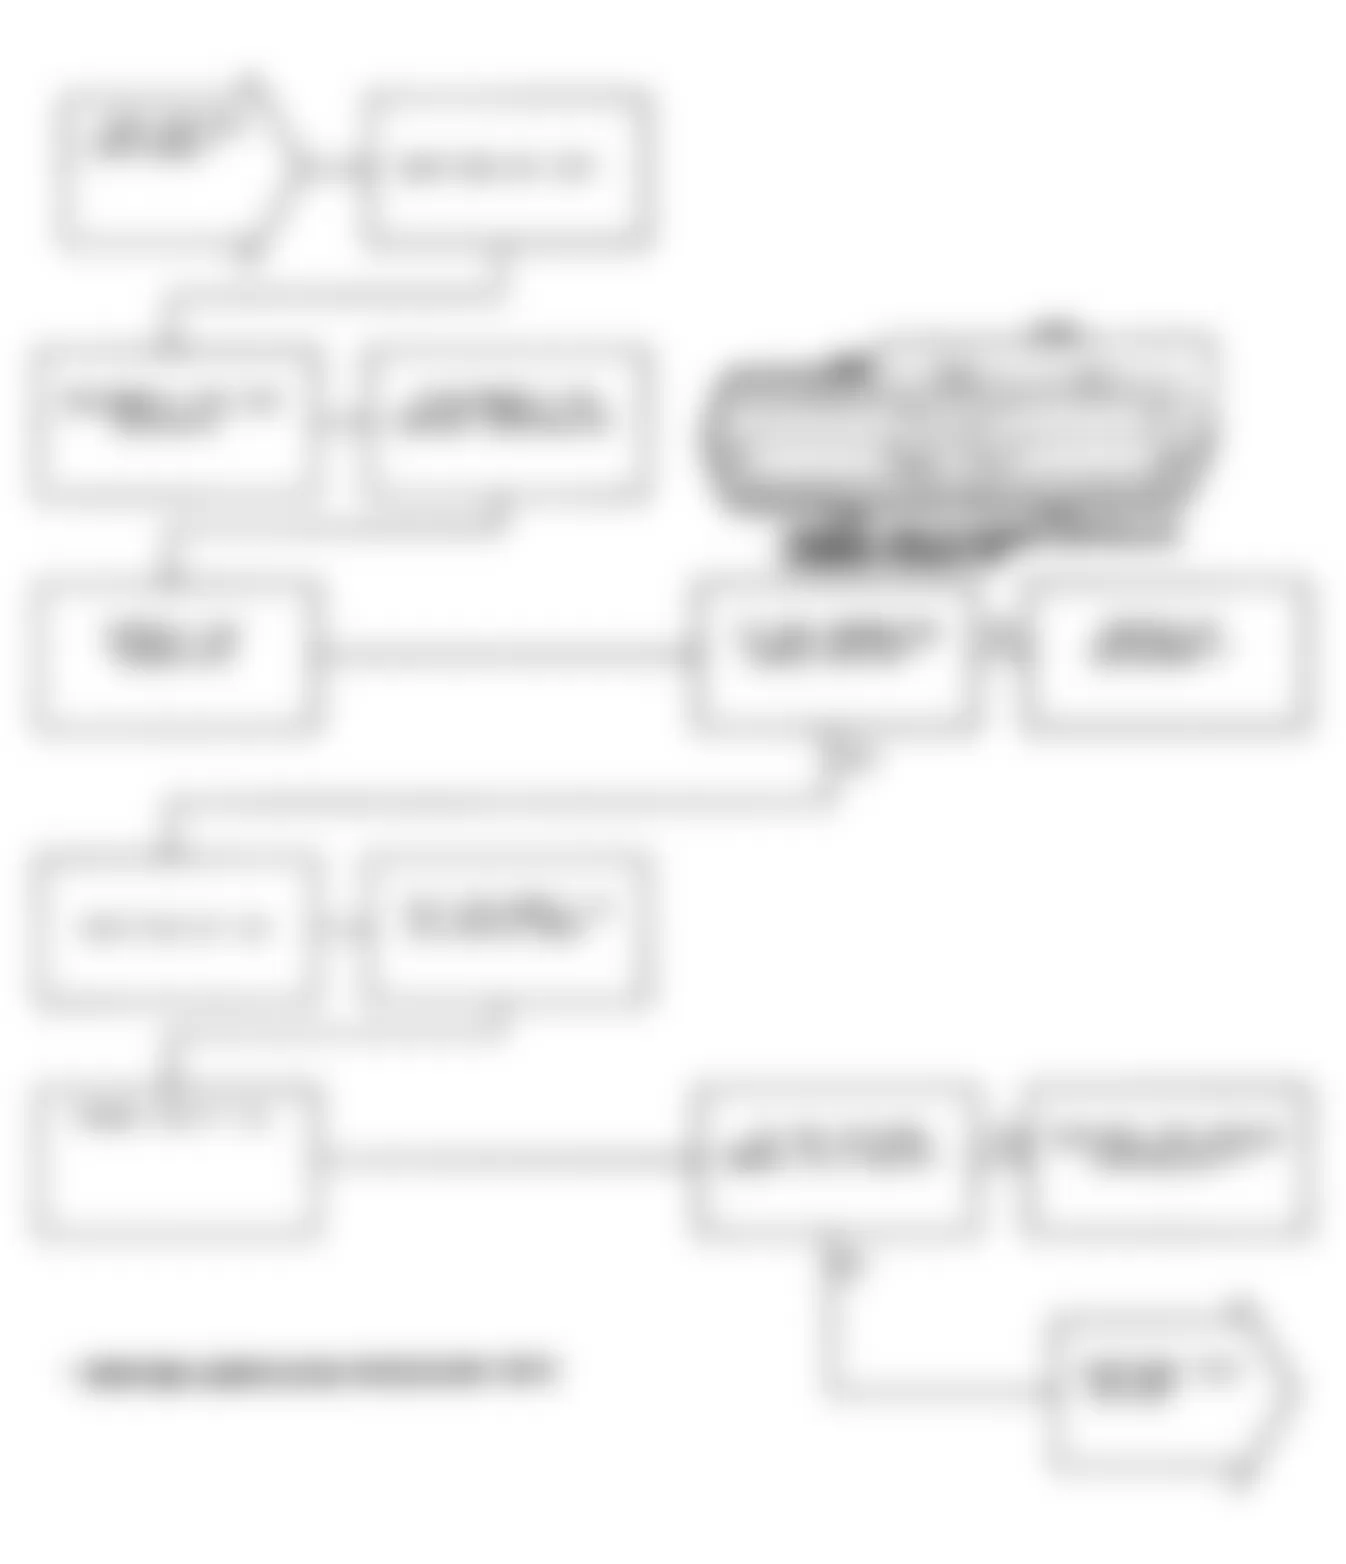 Chrysler New Yorker Fifth Avenue 1991 - Component Locations -  Test DR-22A Code 32: Flowchart (2 of 3)